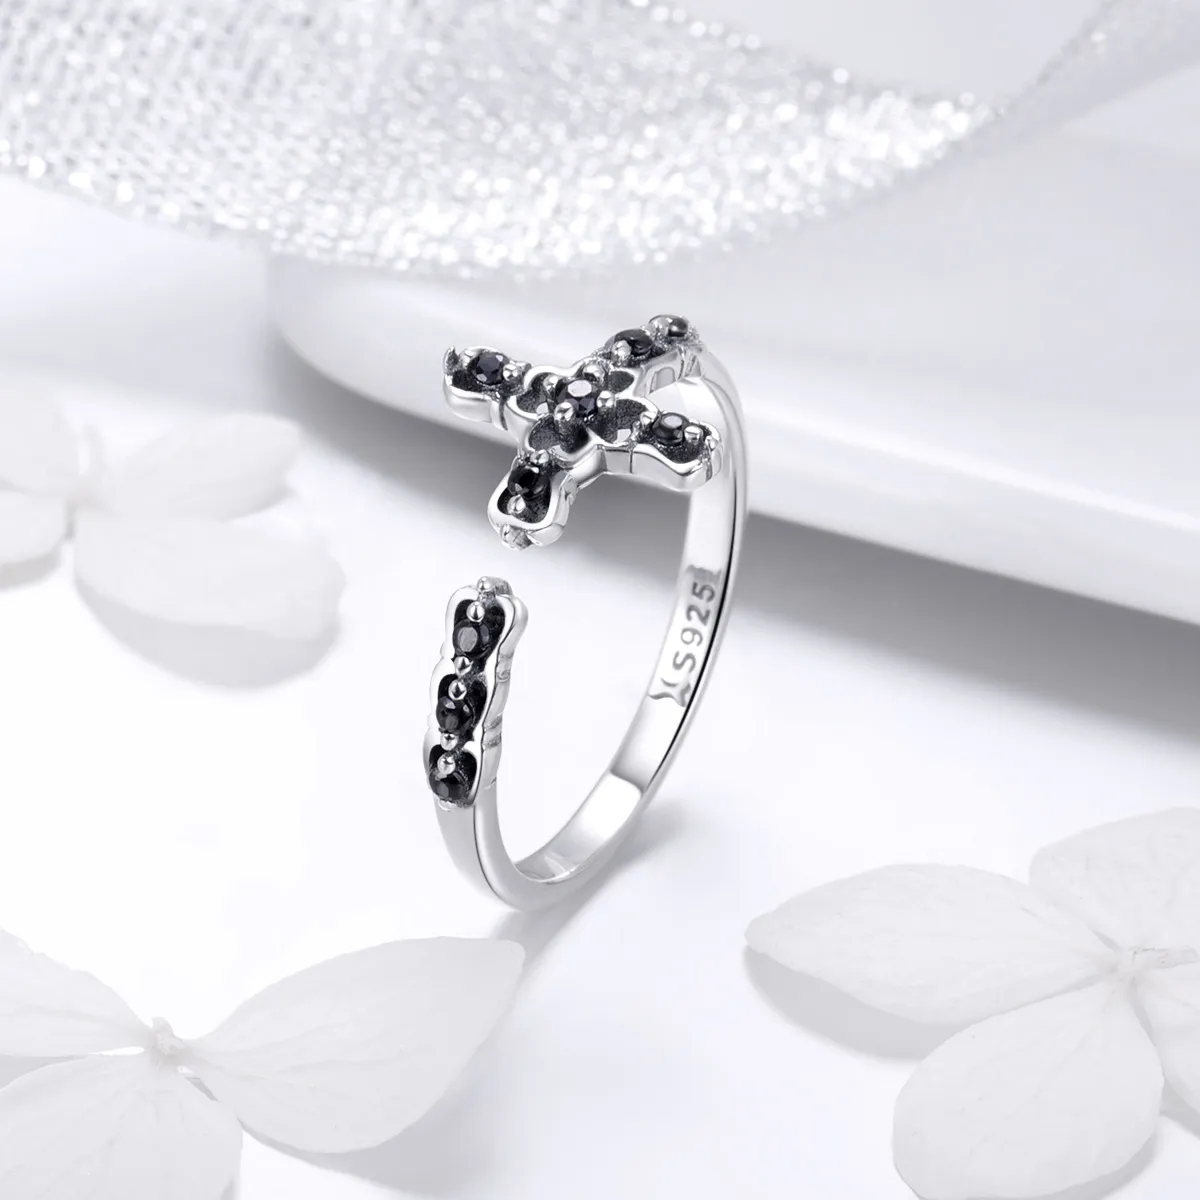 Pandora Style Silver Light of The Cross Ring - SCR447